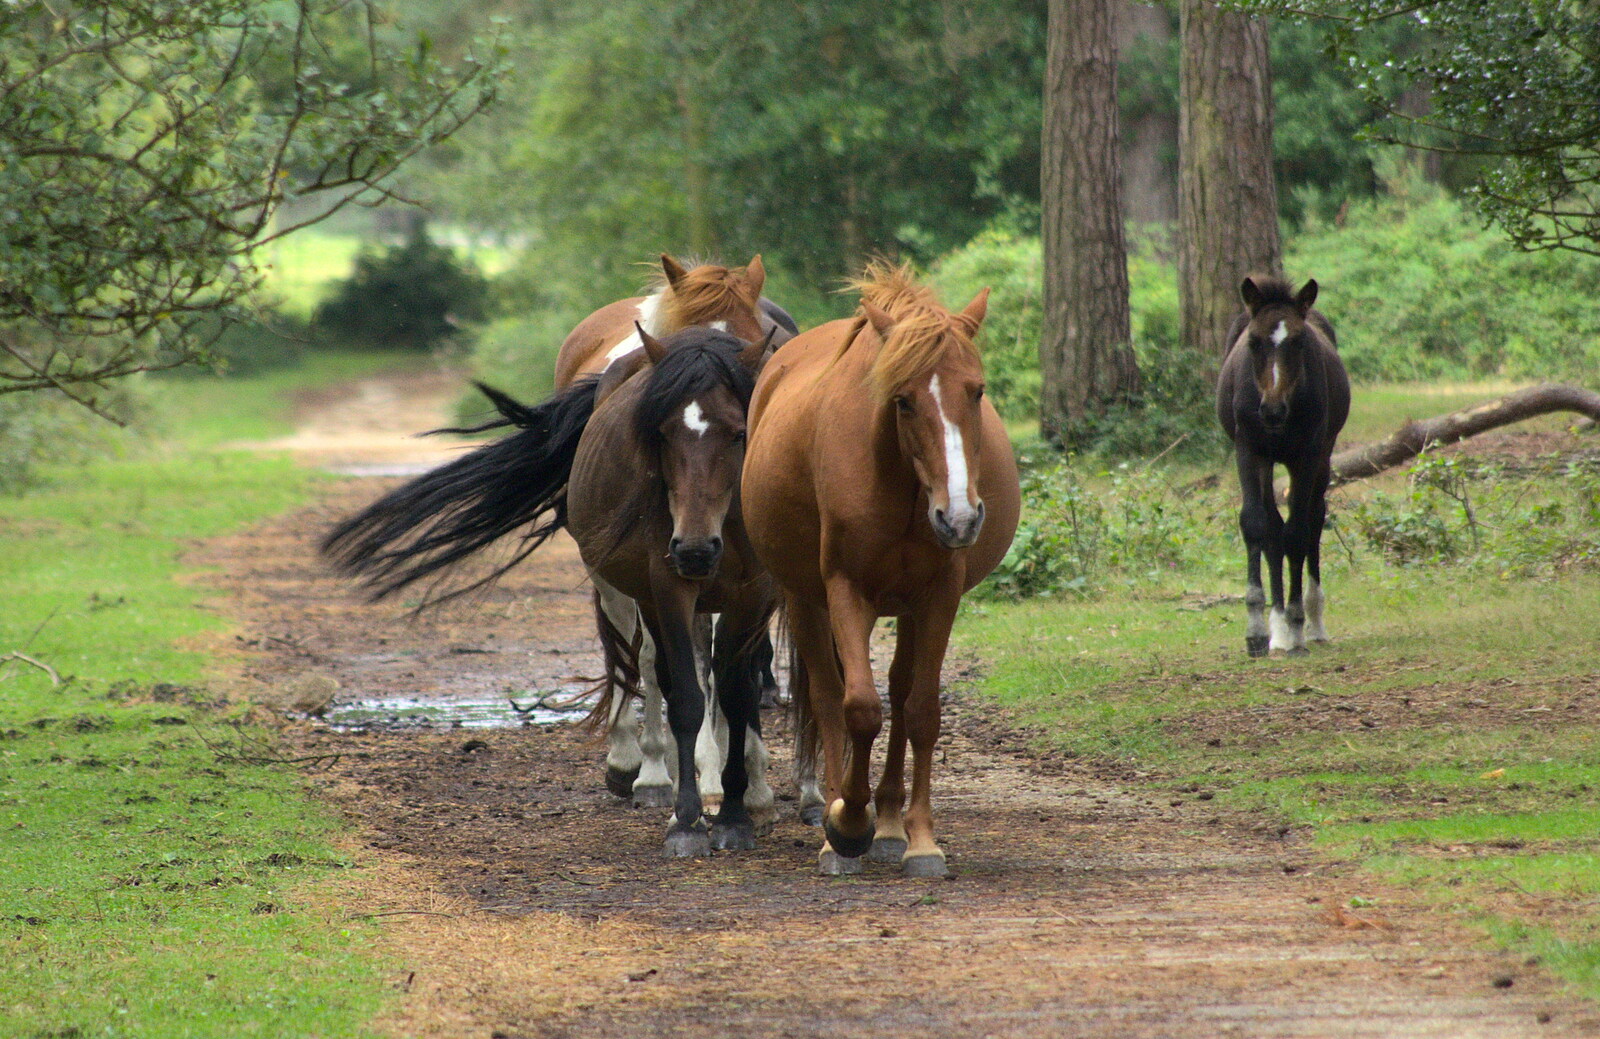 There's a lot of tail swishing from Camping at Roundhills, Brockenhurst, New Forest, Hampshire - 29th August 2015